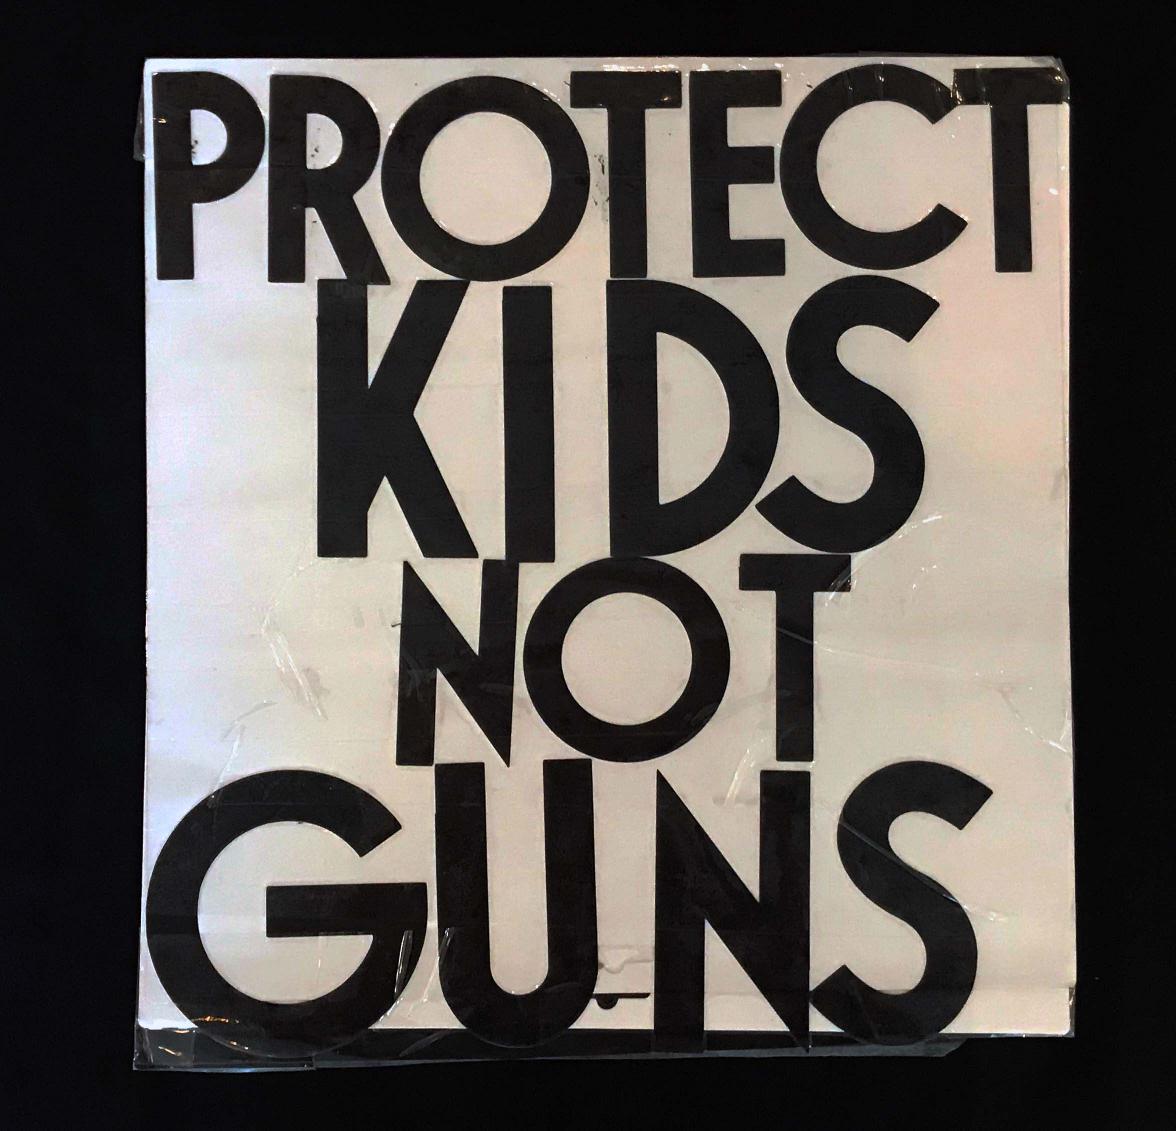 Charlotte March for Our Lives, 2018. Sign reads: "Protect kids, not guns."